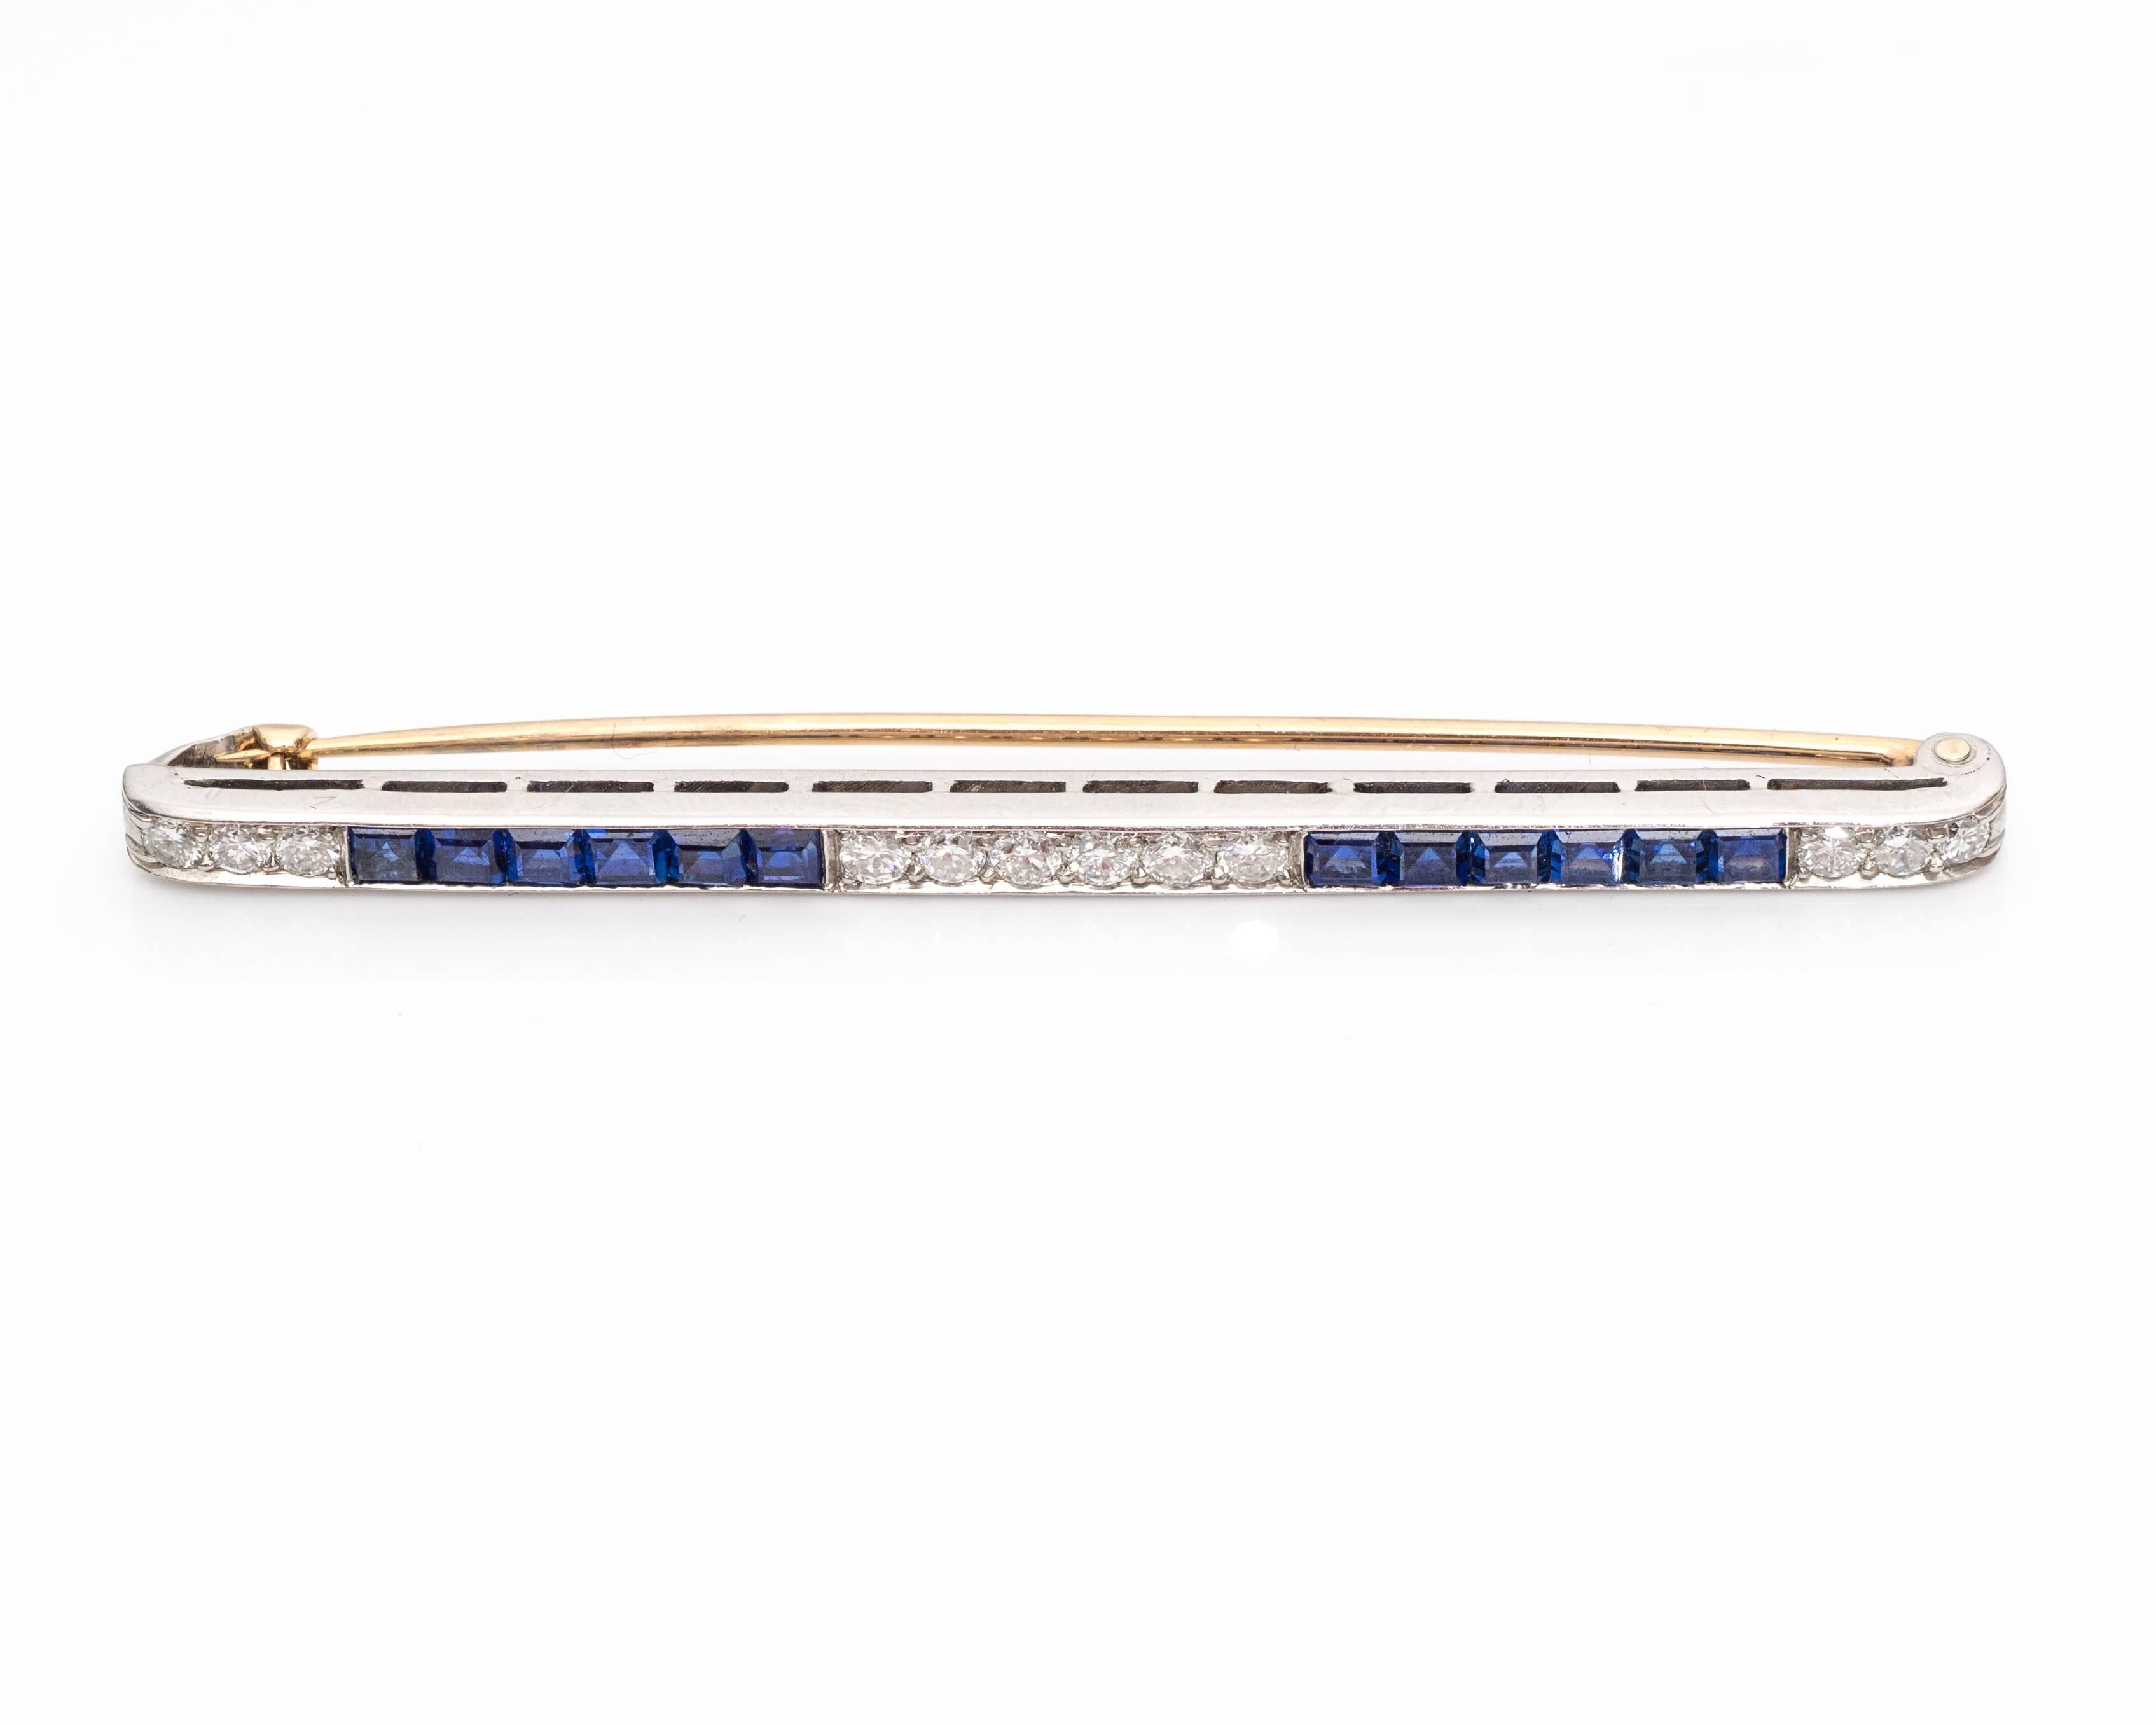 1940s Retro Tiffany & Co. Diamond Platinum Bar Pin Brooch. Features 12 round brilliant diamonds and 12 princess cut blue sapphires along the frame of the bar. A row of 6 diamonds is centered on the pin, flanked by two rows of 6 sapphires, 1 row on